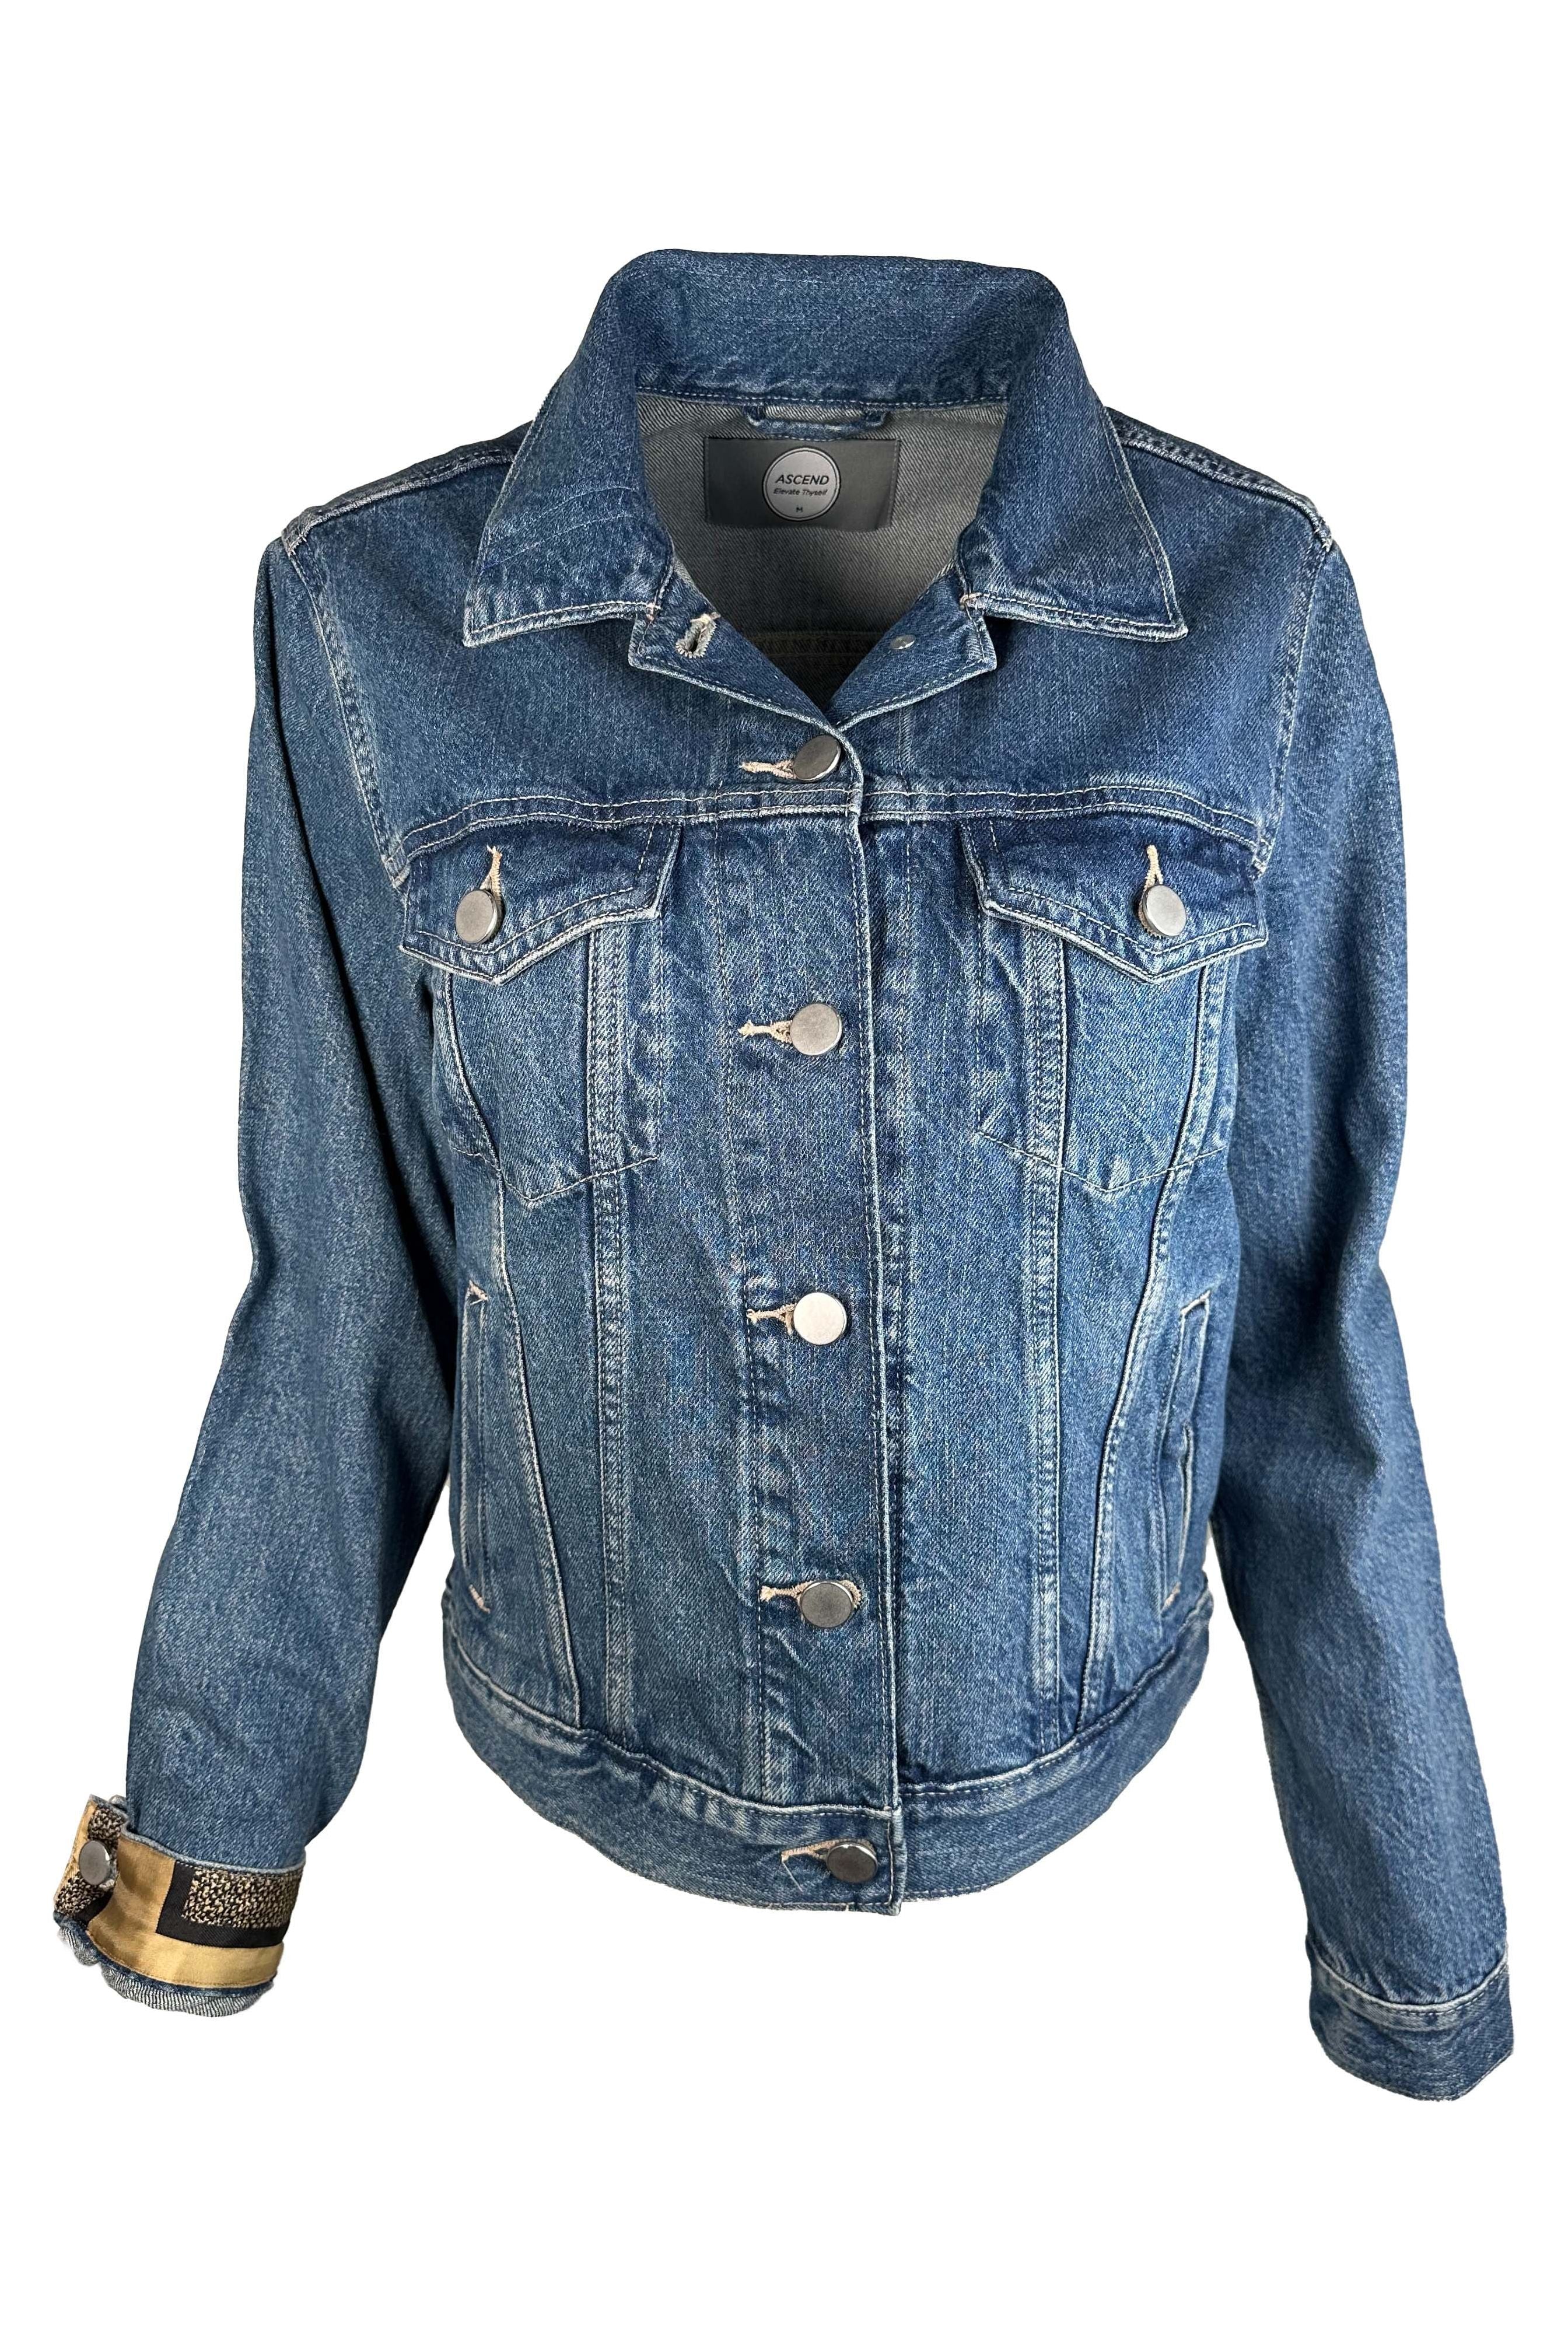 High Quality LOUIS VUITTON Jeans Jackets Available in Store in